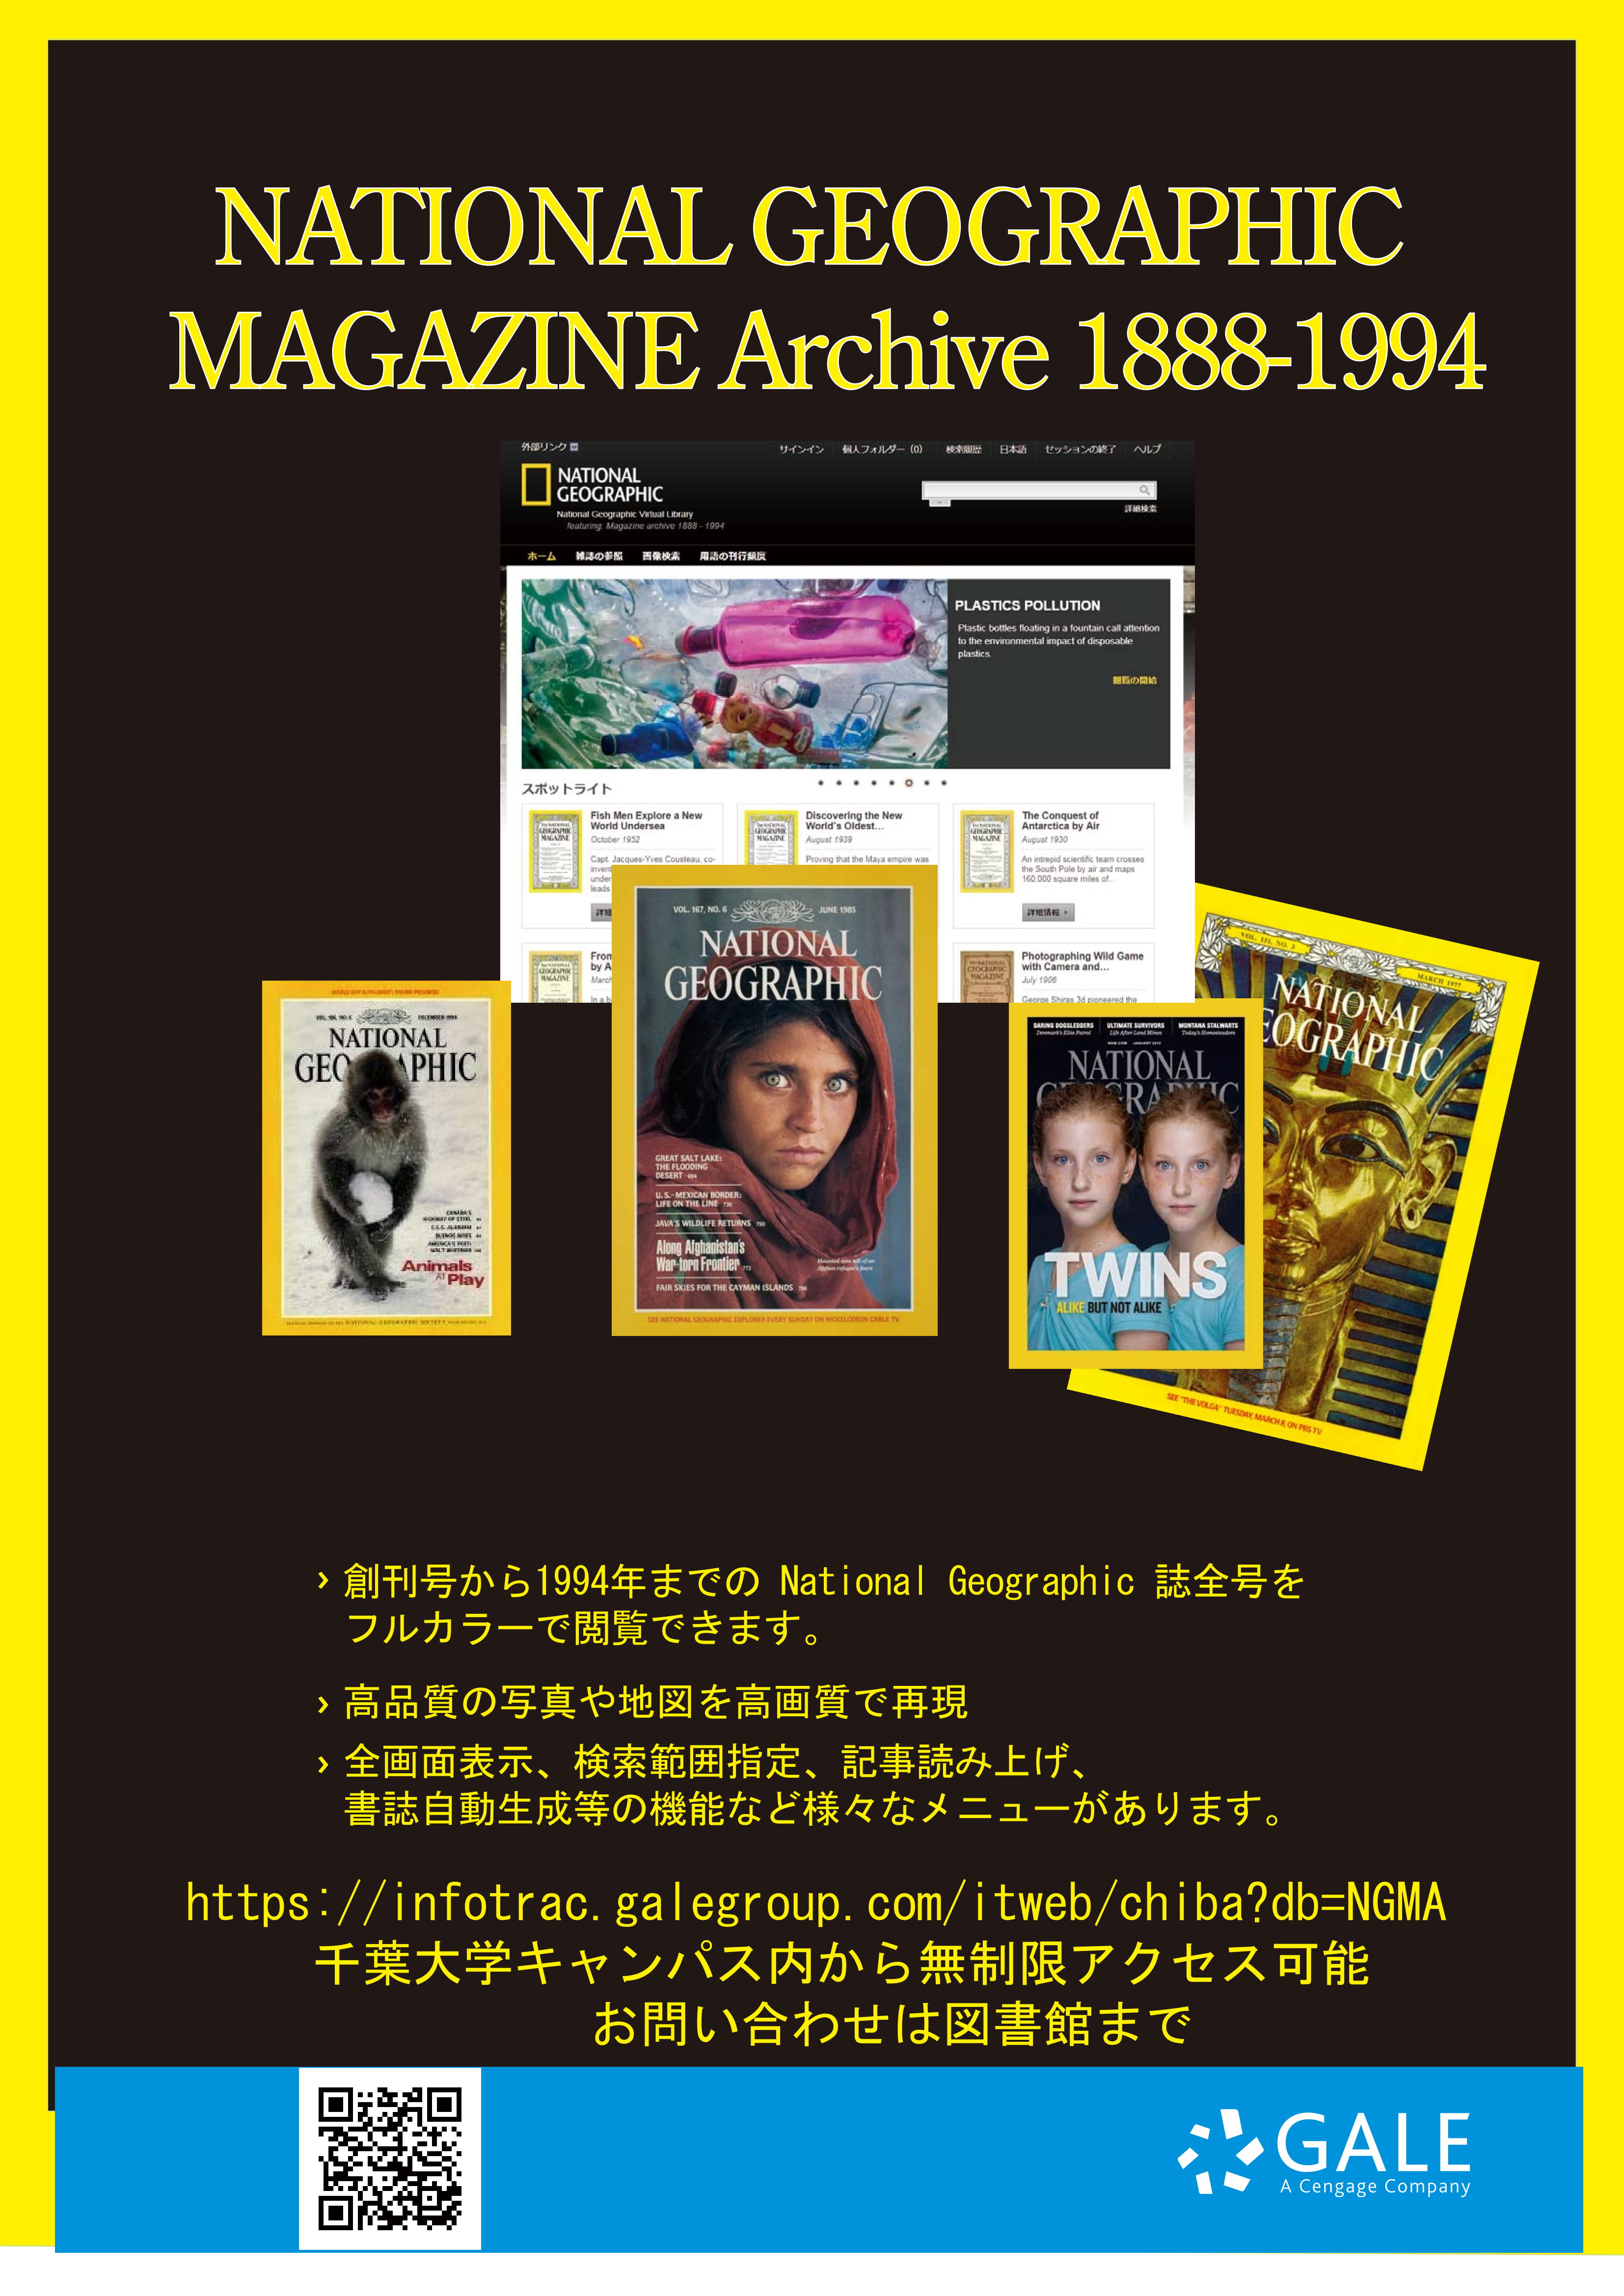 National Geographic Magazine Archive 1888-1994ポスター